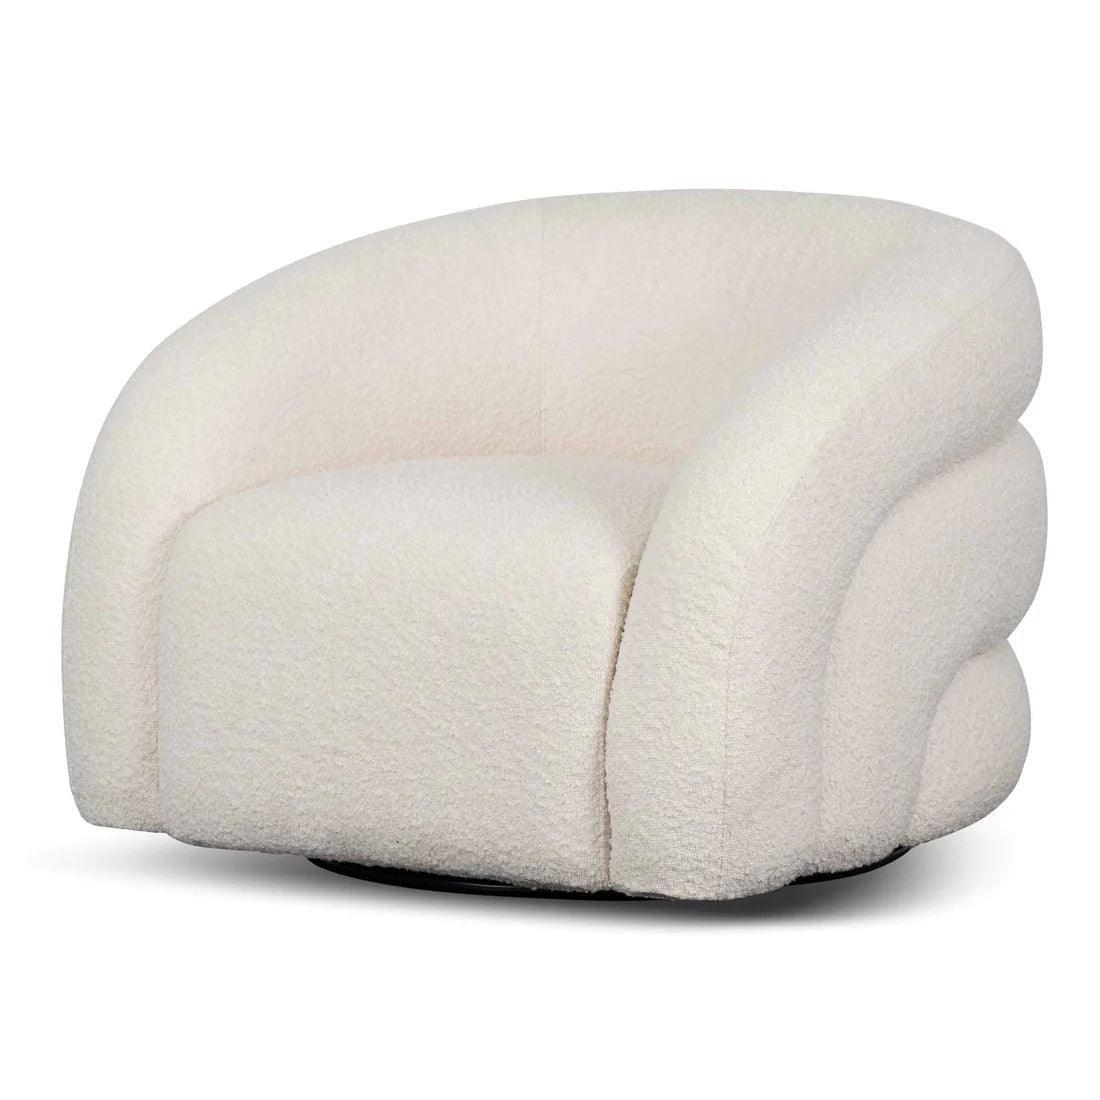 Brow Armchair - Ivory White Boucle - Furniture Castle